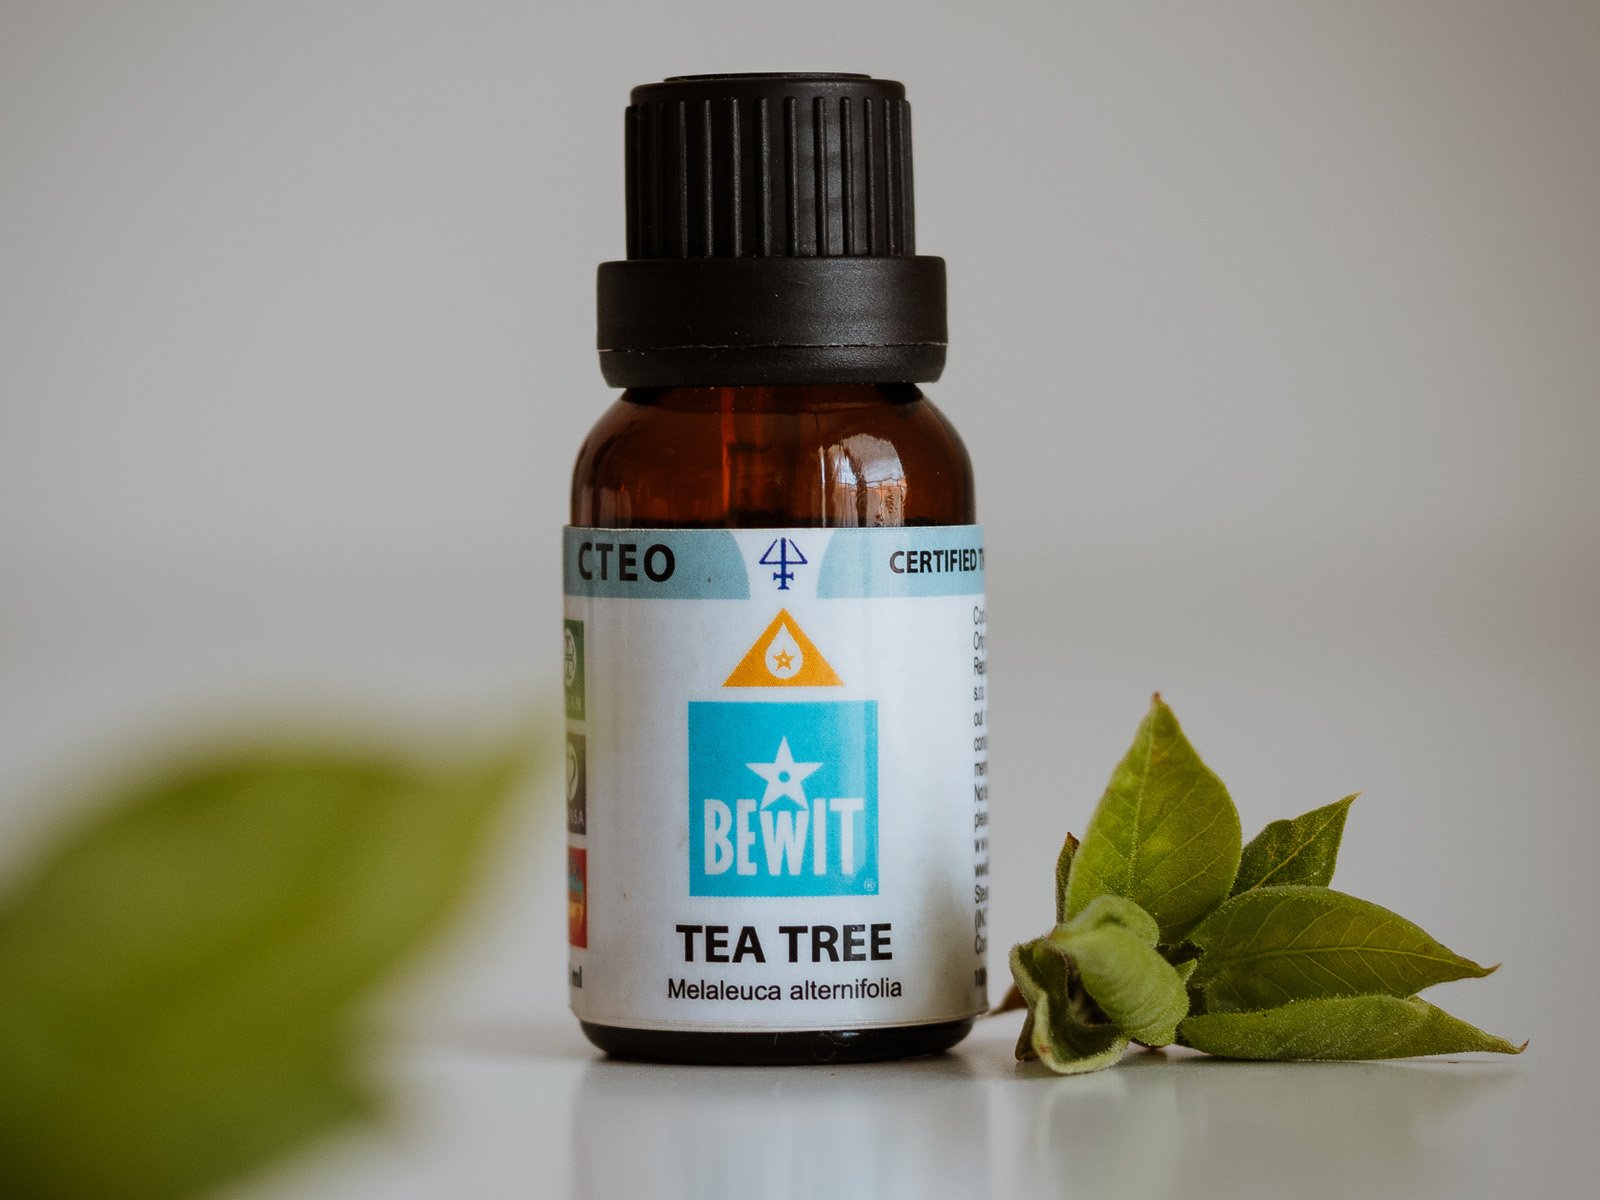 BEWIT Tea tree - 100% pure and natural CTEO® essential oil - 7